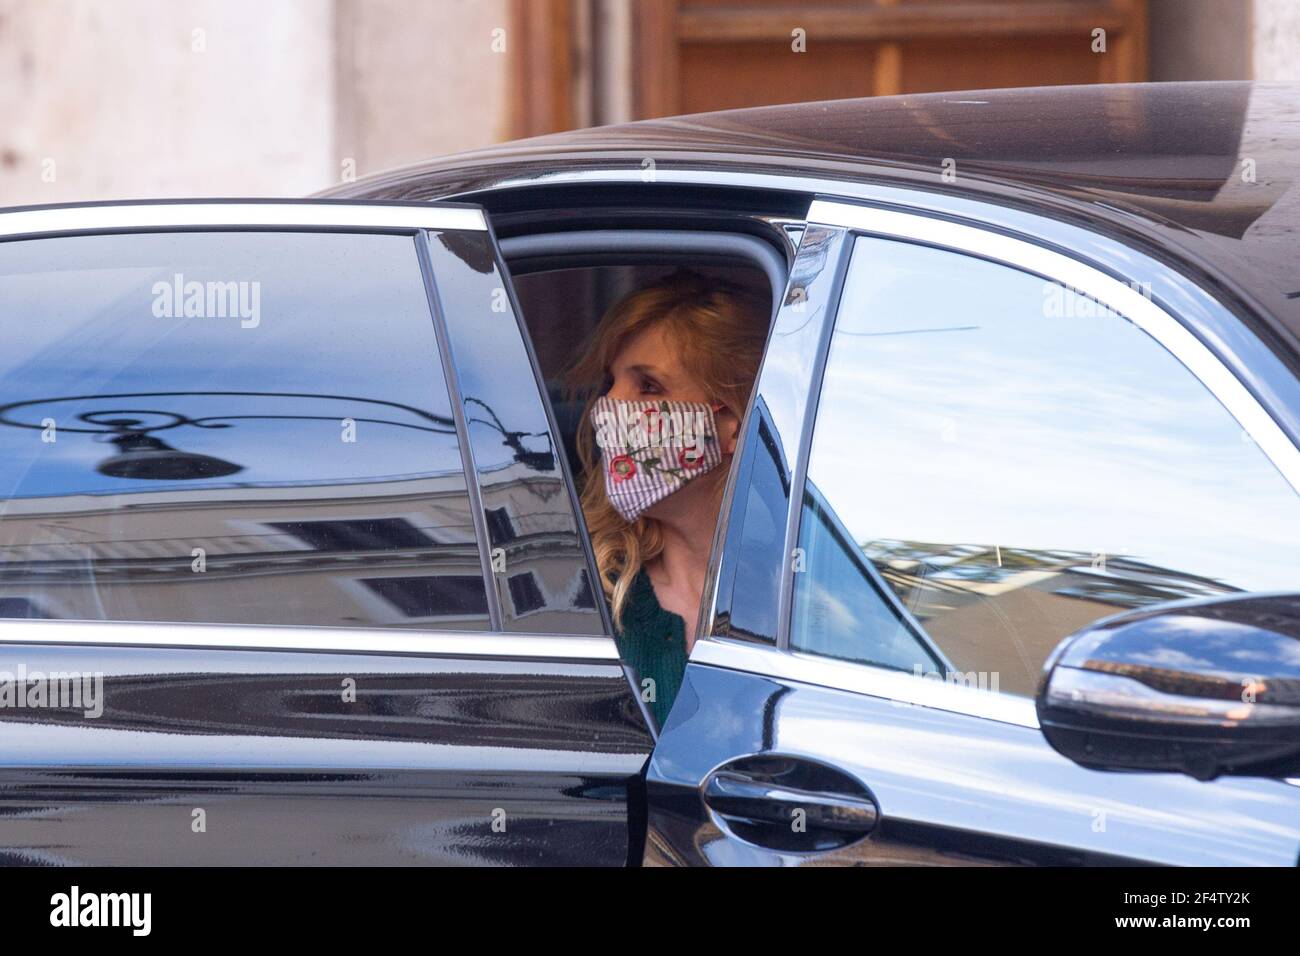 British actress Kelly Reilly gets into the car after finishing shooting the film. The Italian actor Pierfrancesco Favino and the English actress Kelly Reilly in Rome during the shooting of the film 'Promises' directed by the French director and writer Amanda Sthers. (Photo by Matteo Nardone/Pacific Press/Sipa USA) Stock Photo